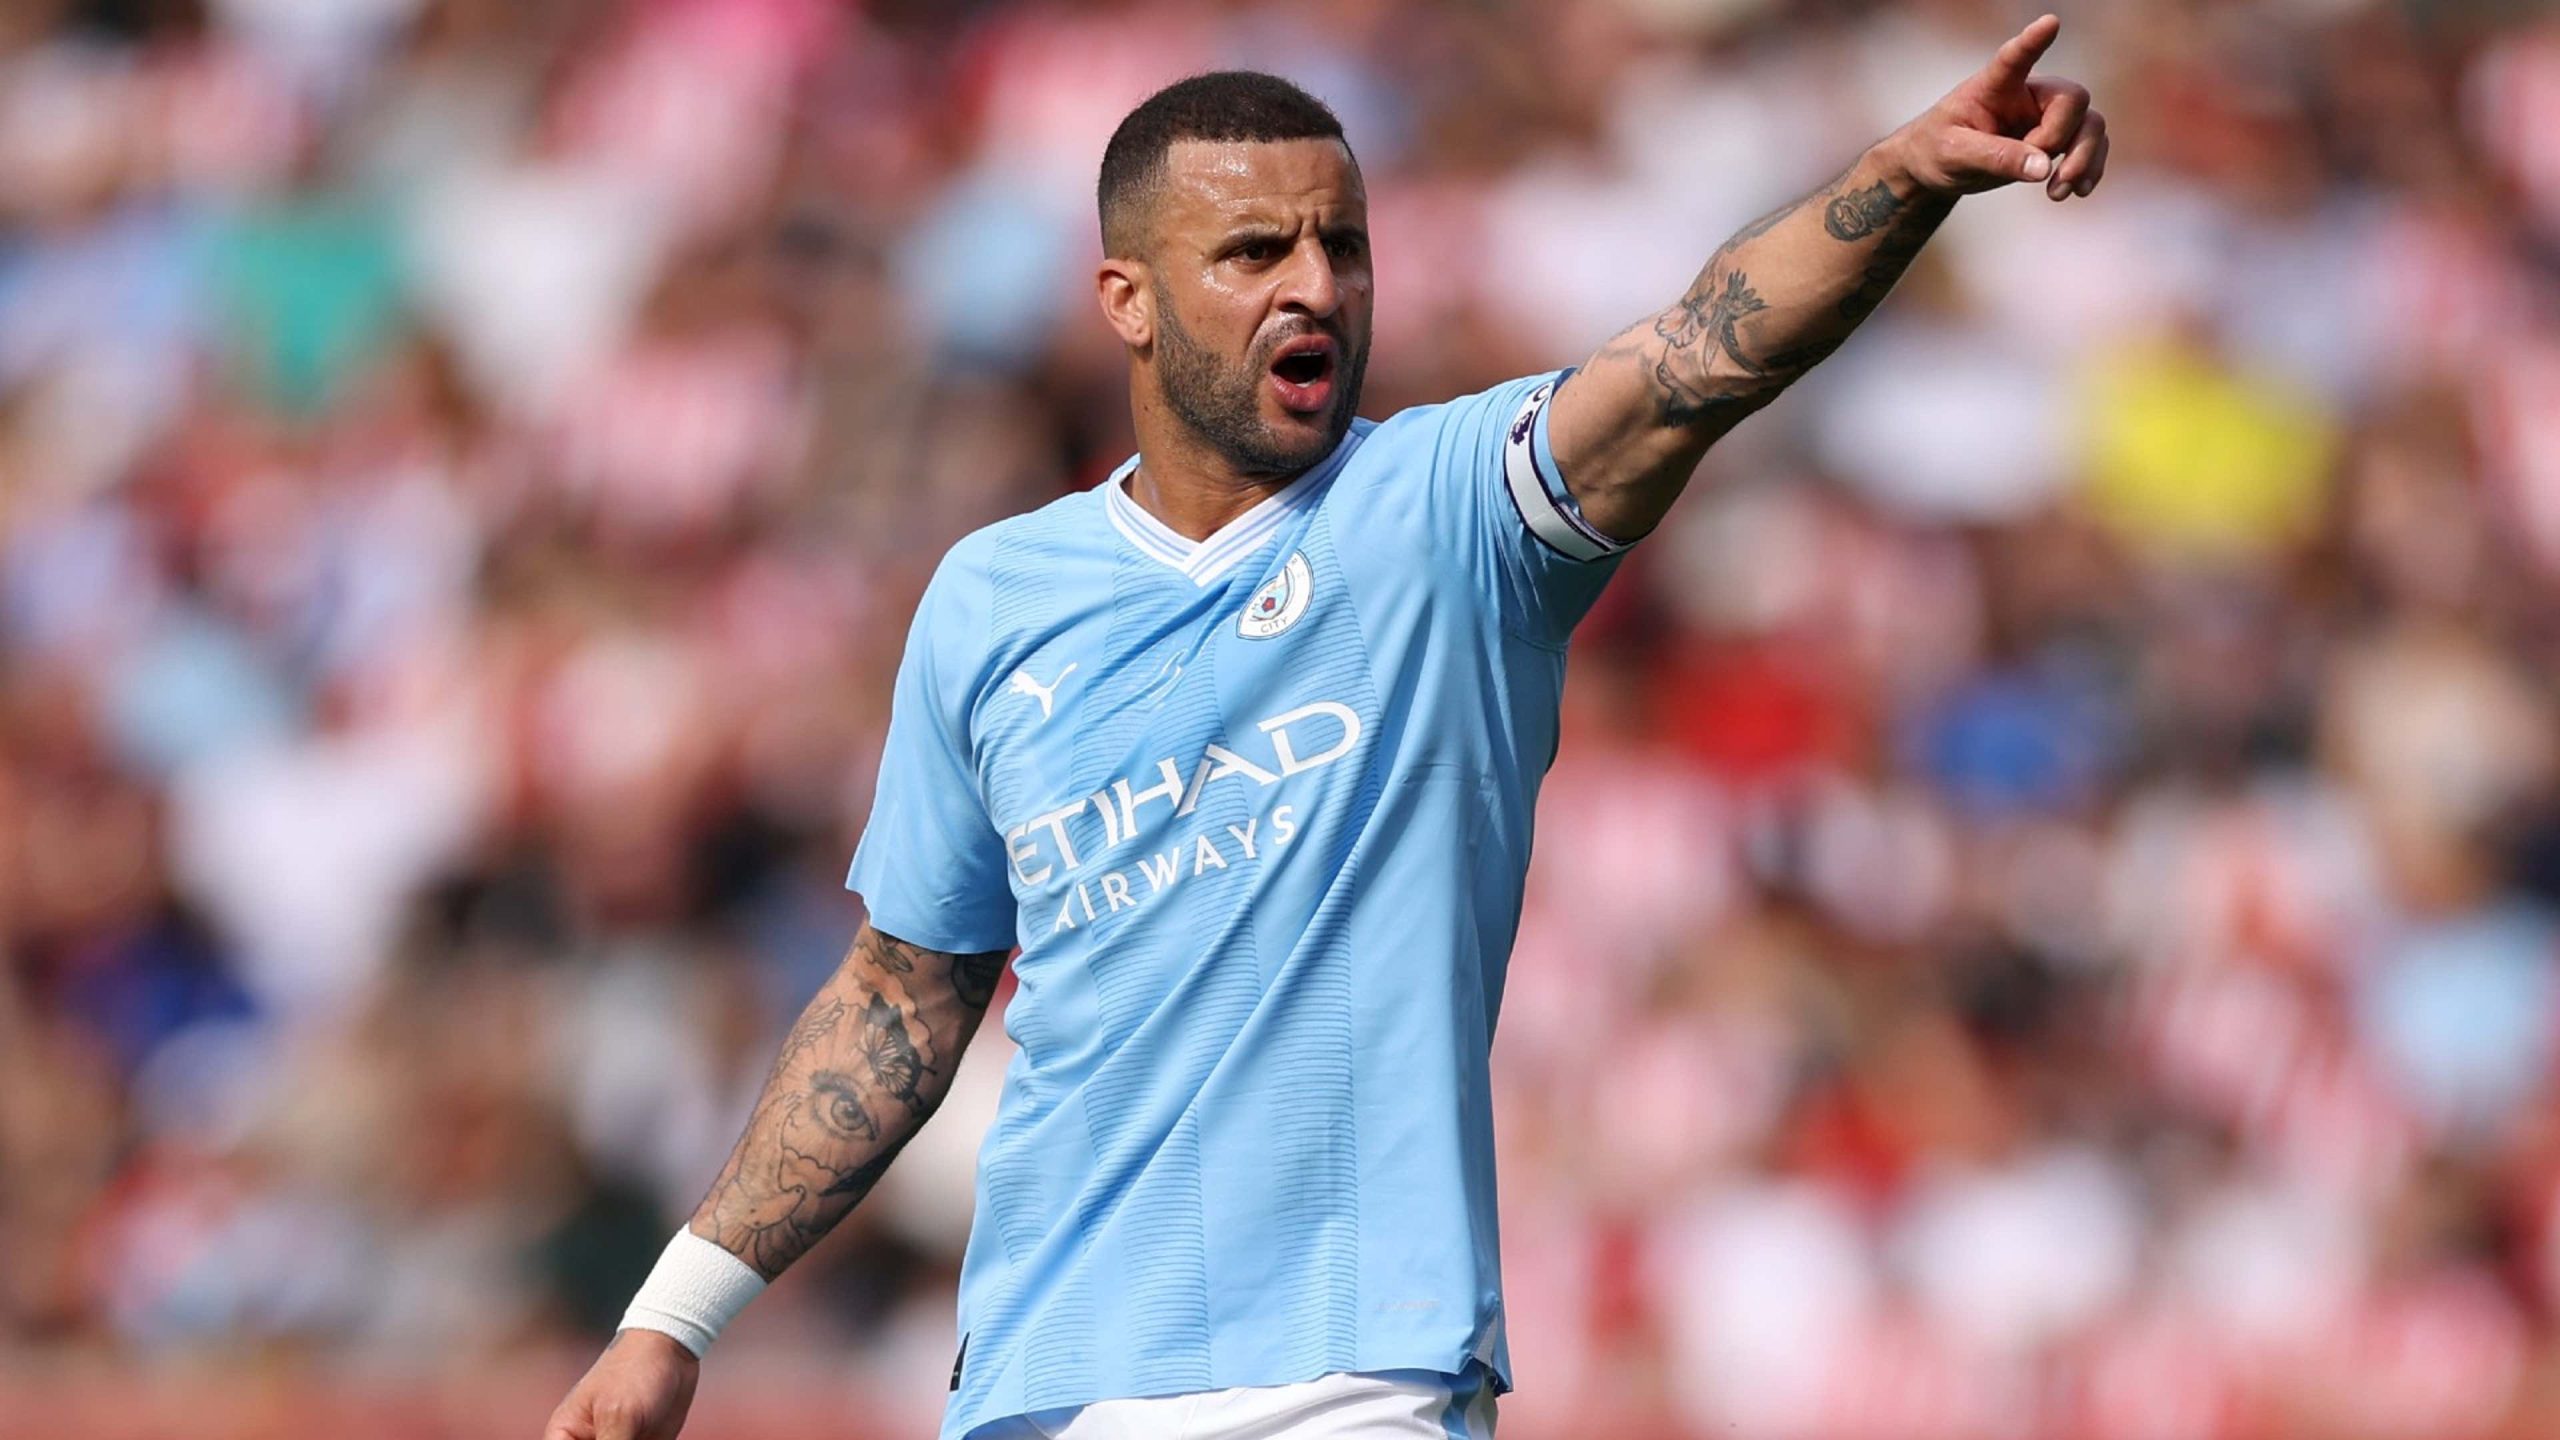 Breaking News: Manchester City’s New Move to Keep Kyle Walker Away from Bayern Munich